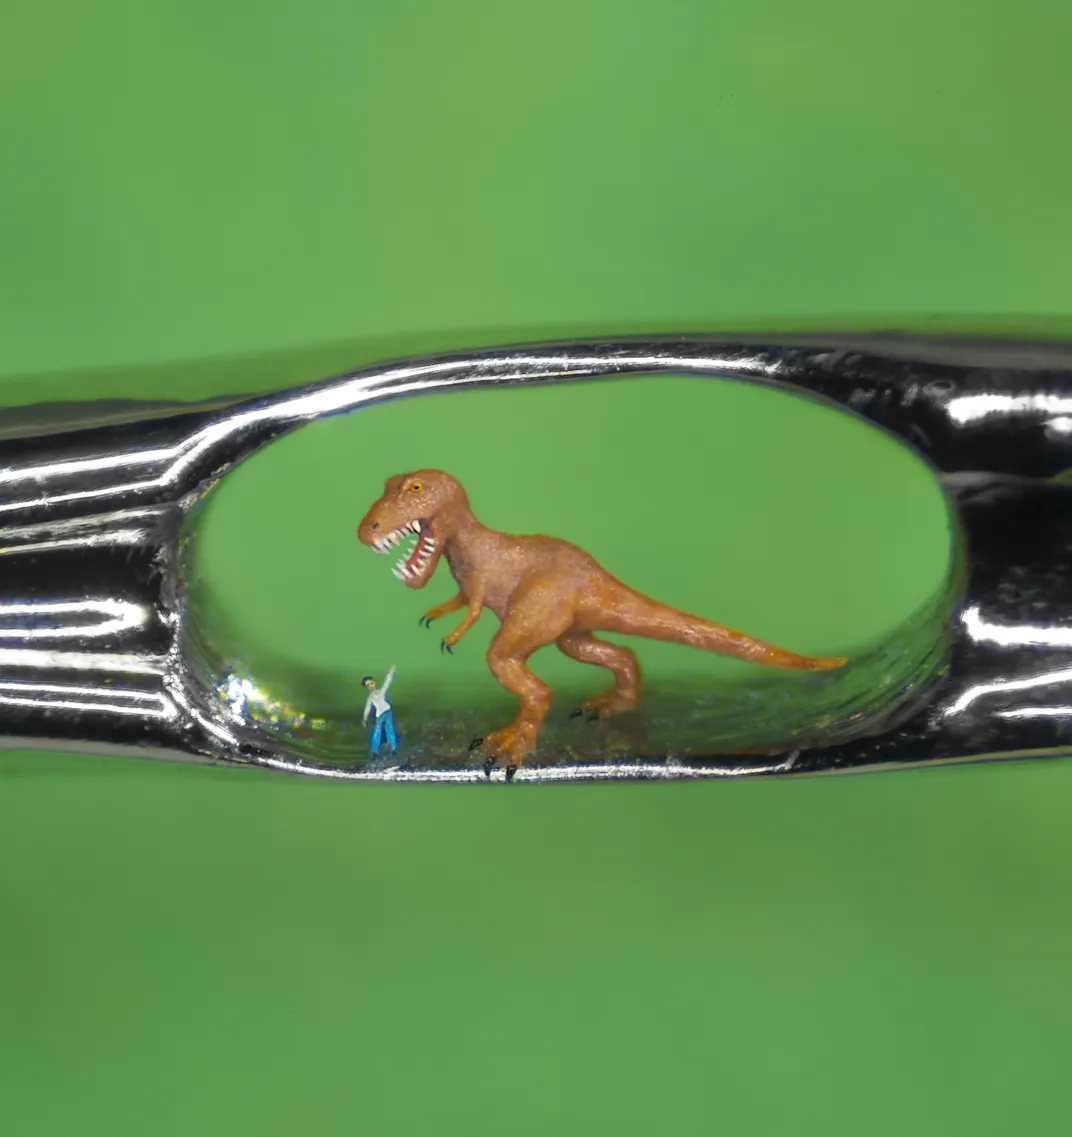 T. rex in the head of a needle